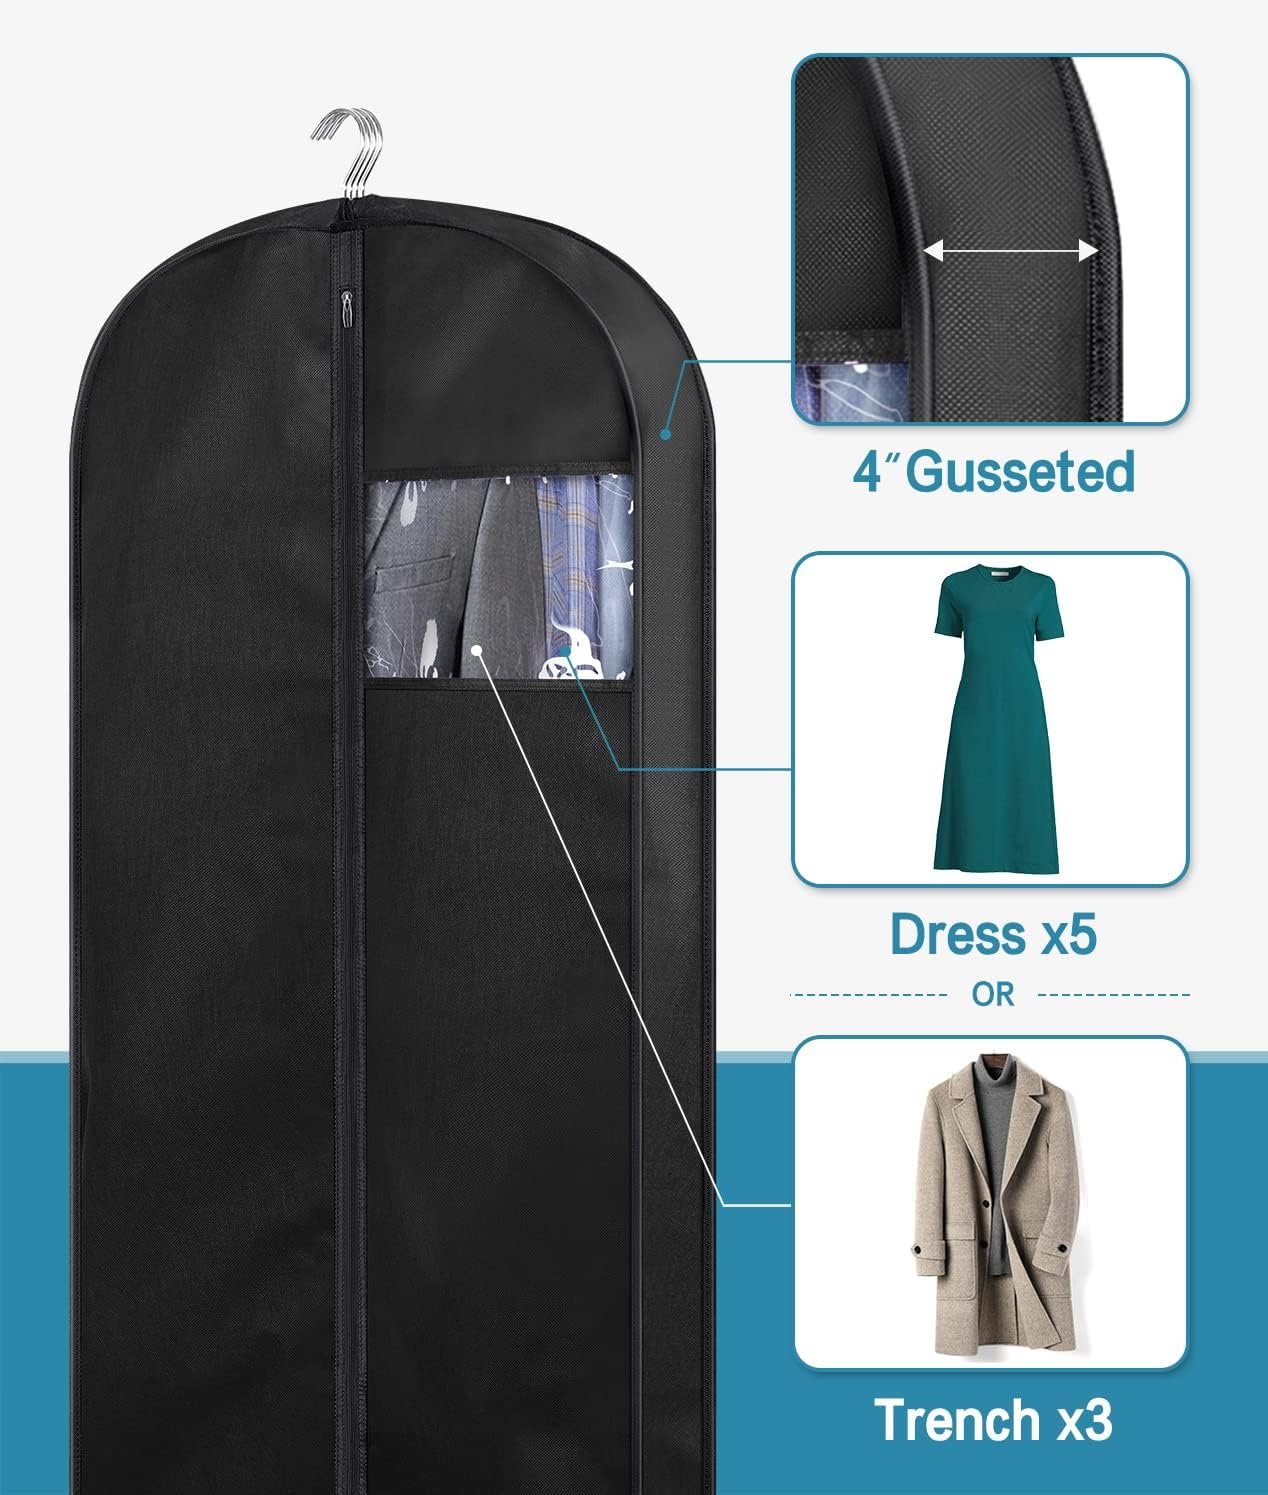 KIMBORA 54 Suit Bags for Closet Storage and Travel, Gusseted Hanging Garment Bags for Men Suit Cover With Handles for Clothes, Coats, Jackets, Shirts（3 Packs）